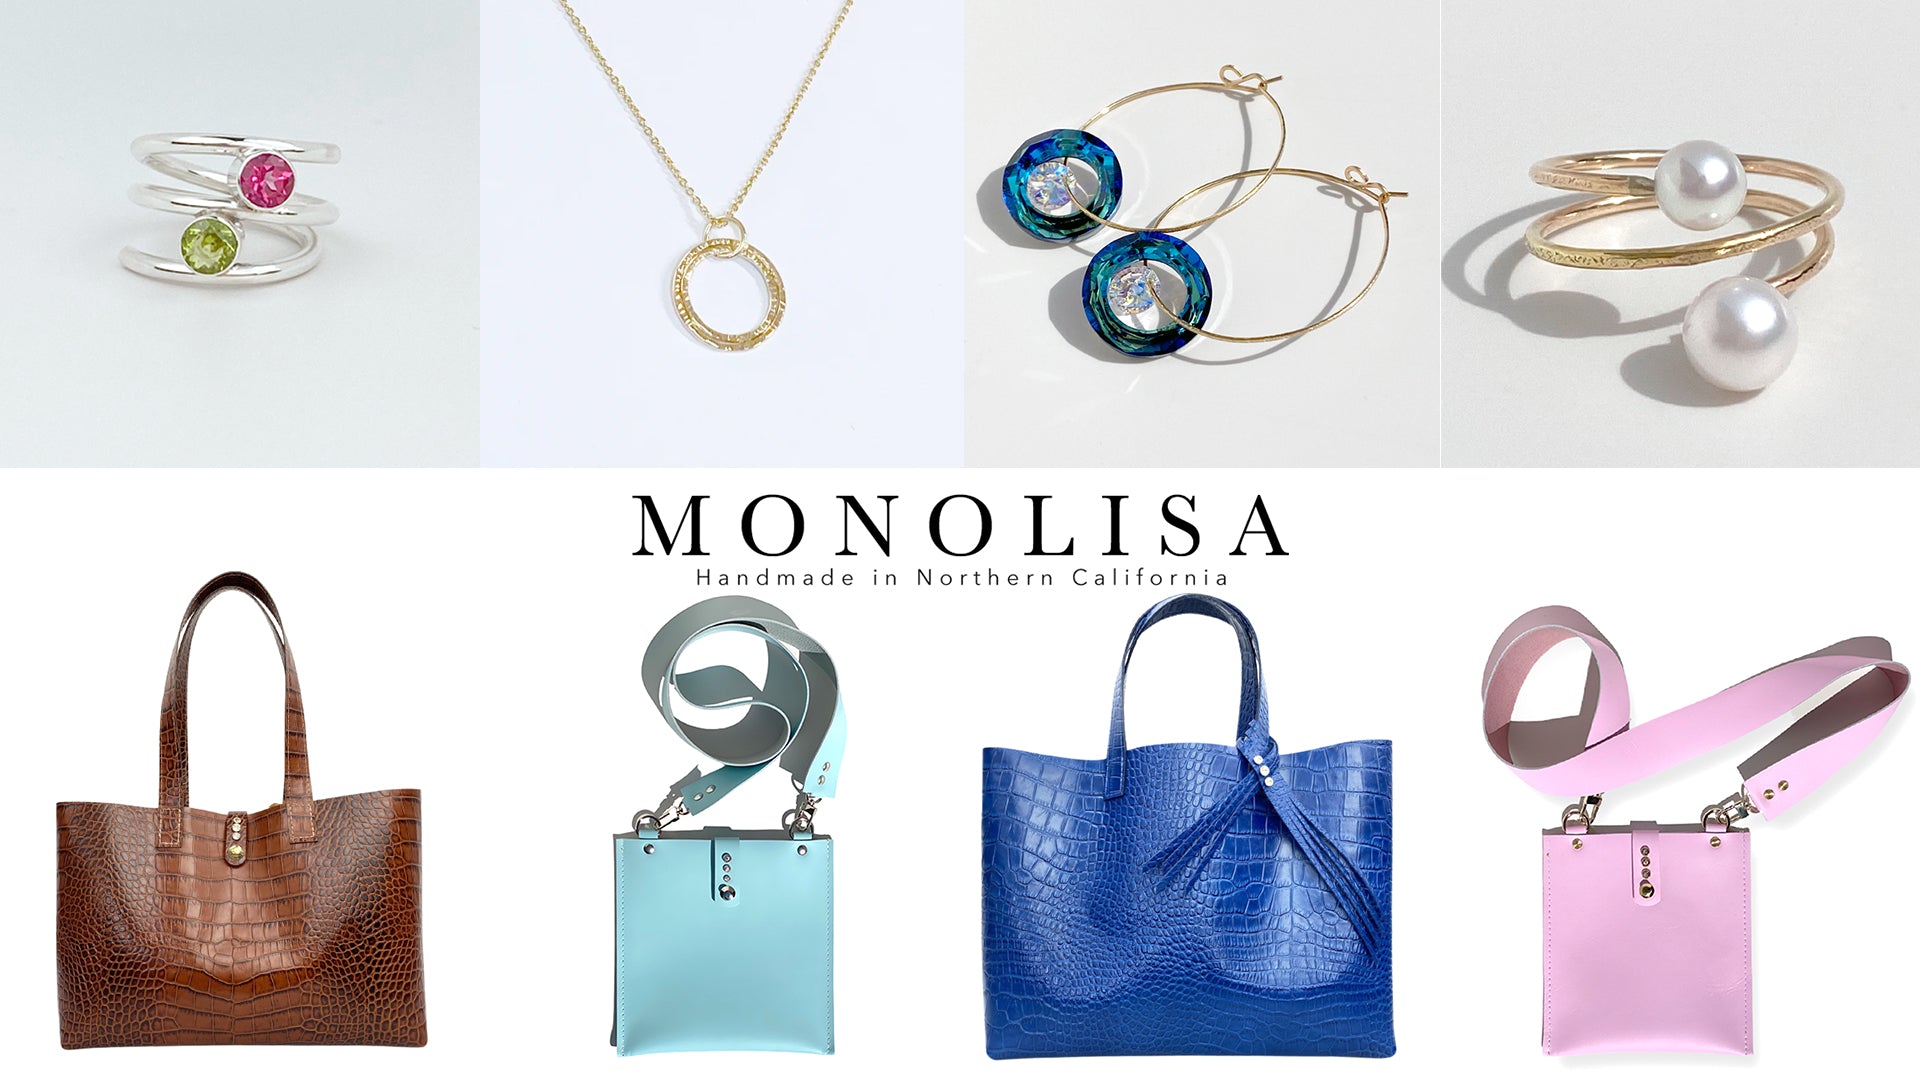 Picture of the MONOLISA Handbag & Jewelry Collection by California Artist Lisa Ramos from Artist Lift Blog: Artist Life - 20 Things I Do to Run My Business